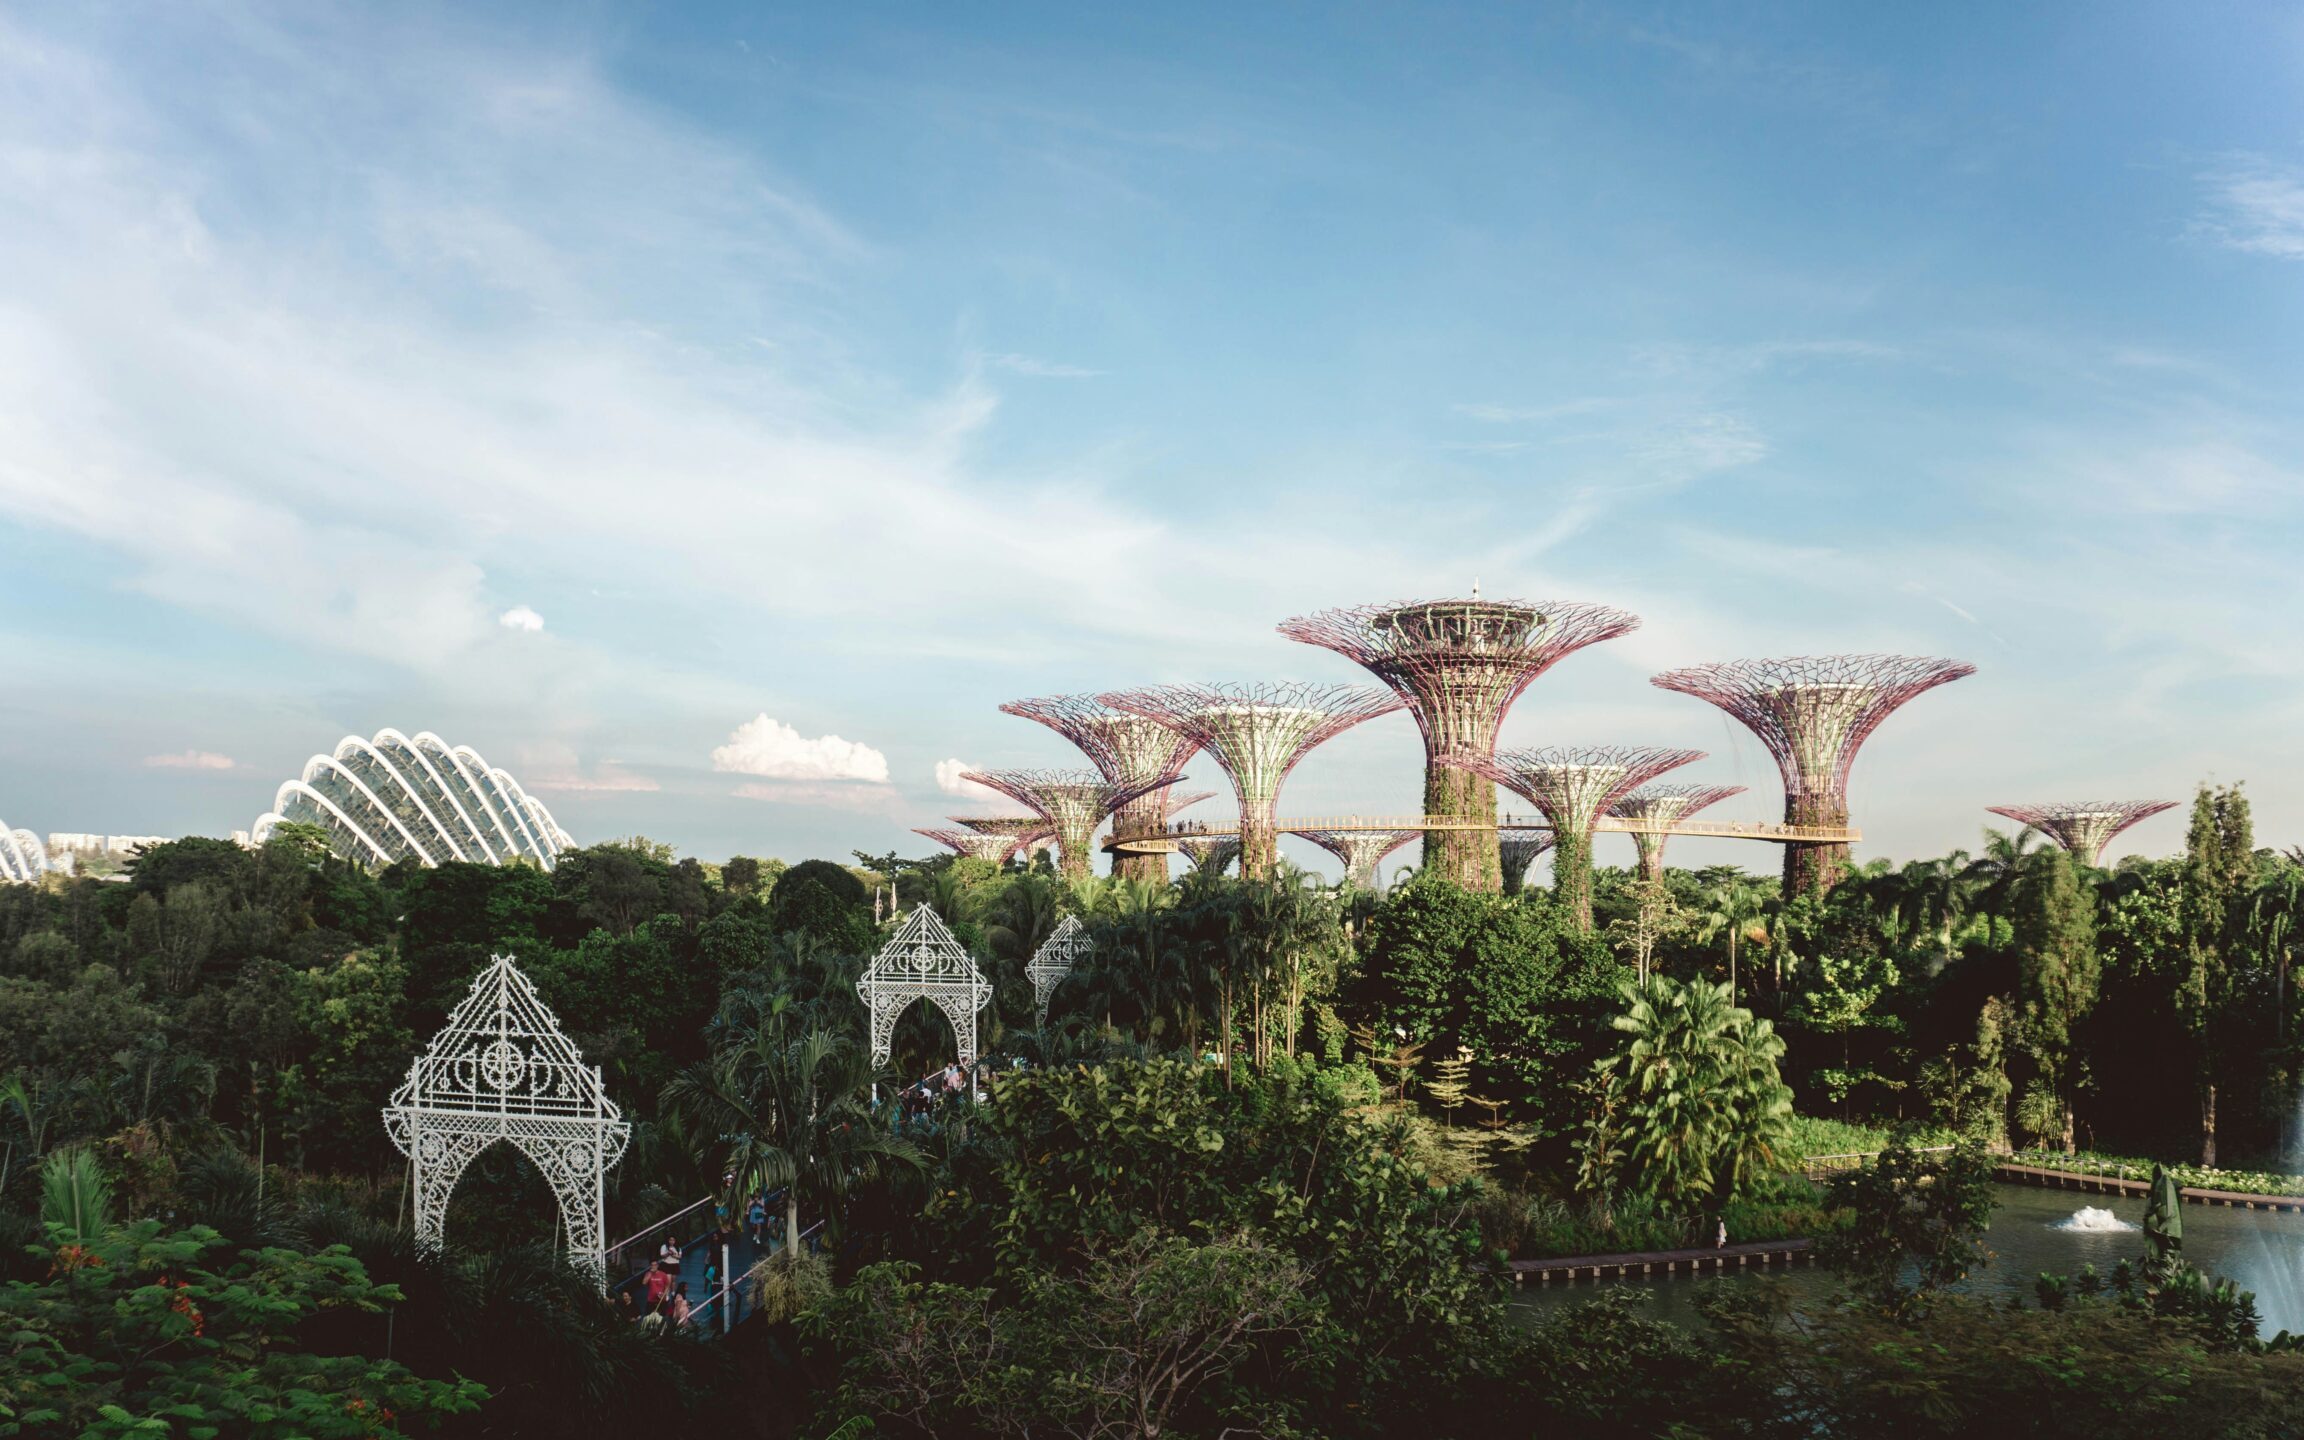 The Top 10 Things to Do in Singapore